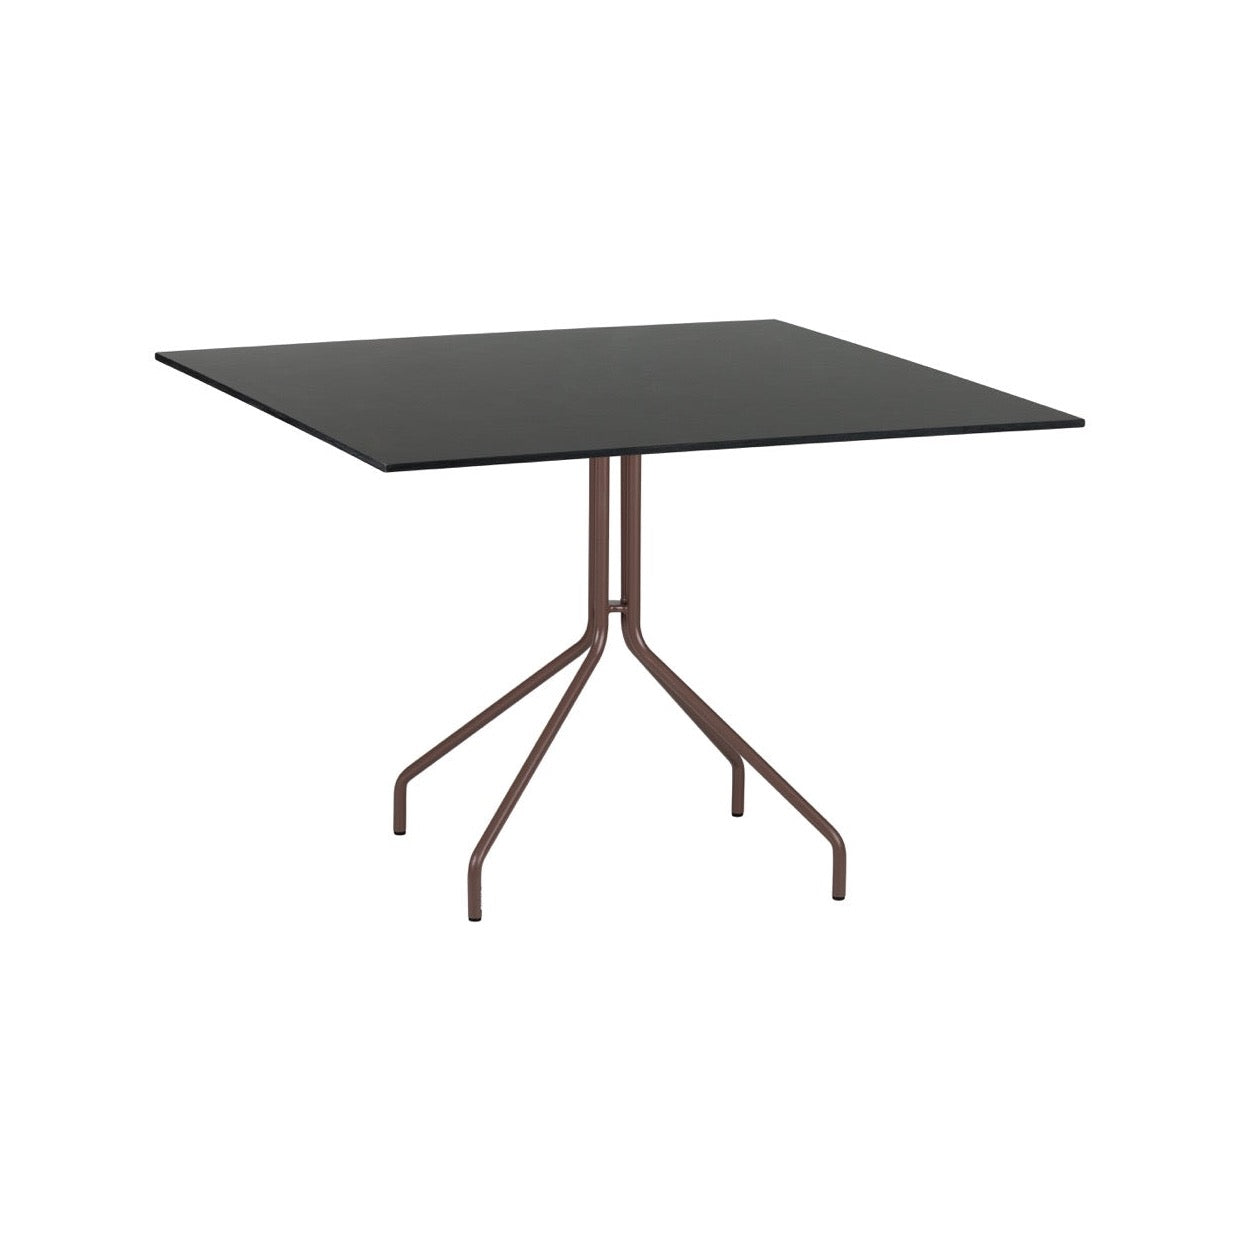 Weave dining table 80 cm